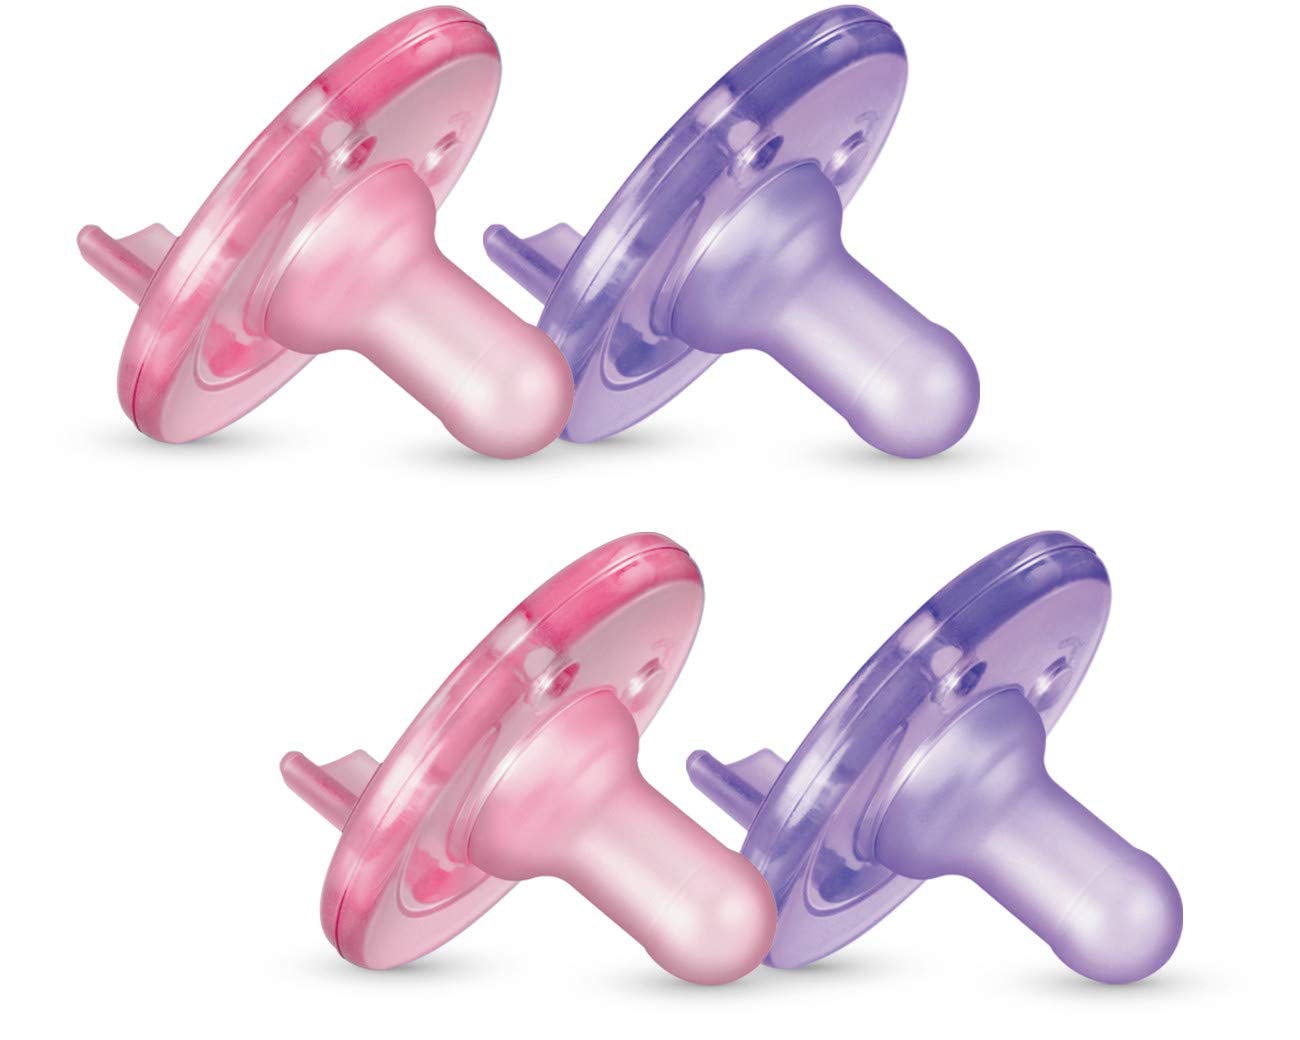 Philips Avent Soothie Pacifier, Pink/Purple, 0-3 Months, 4 Pack